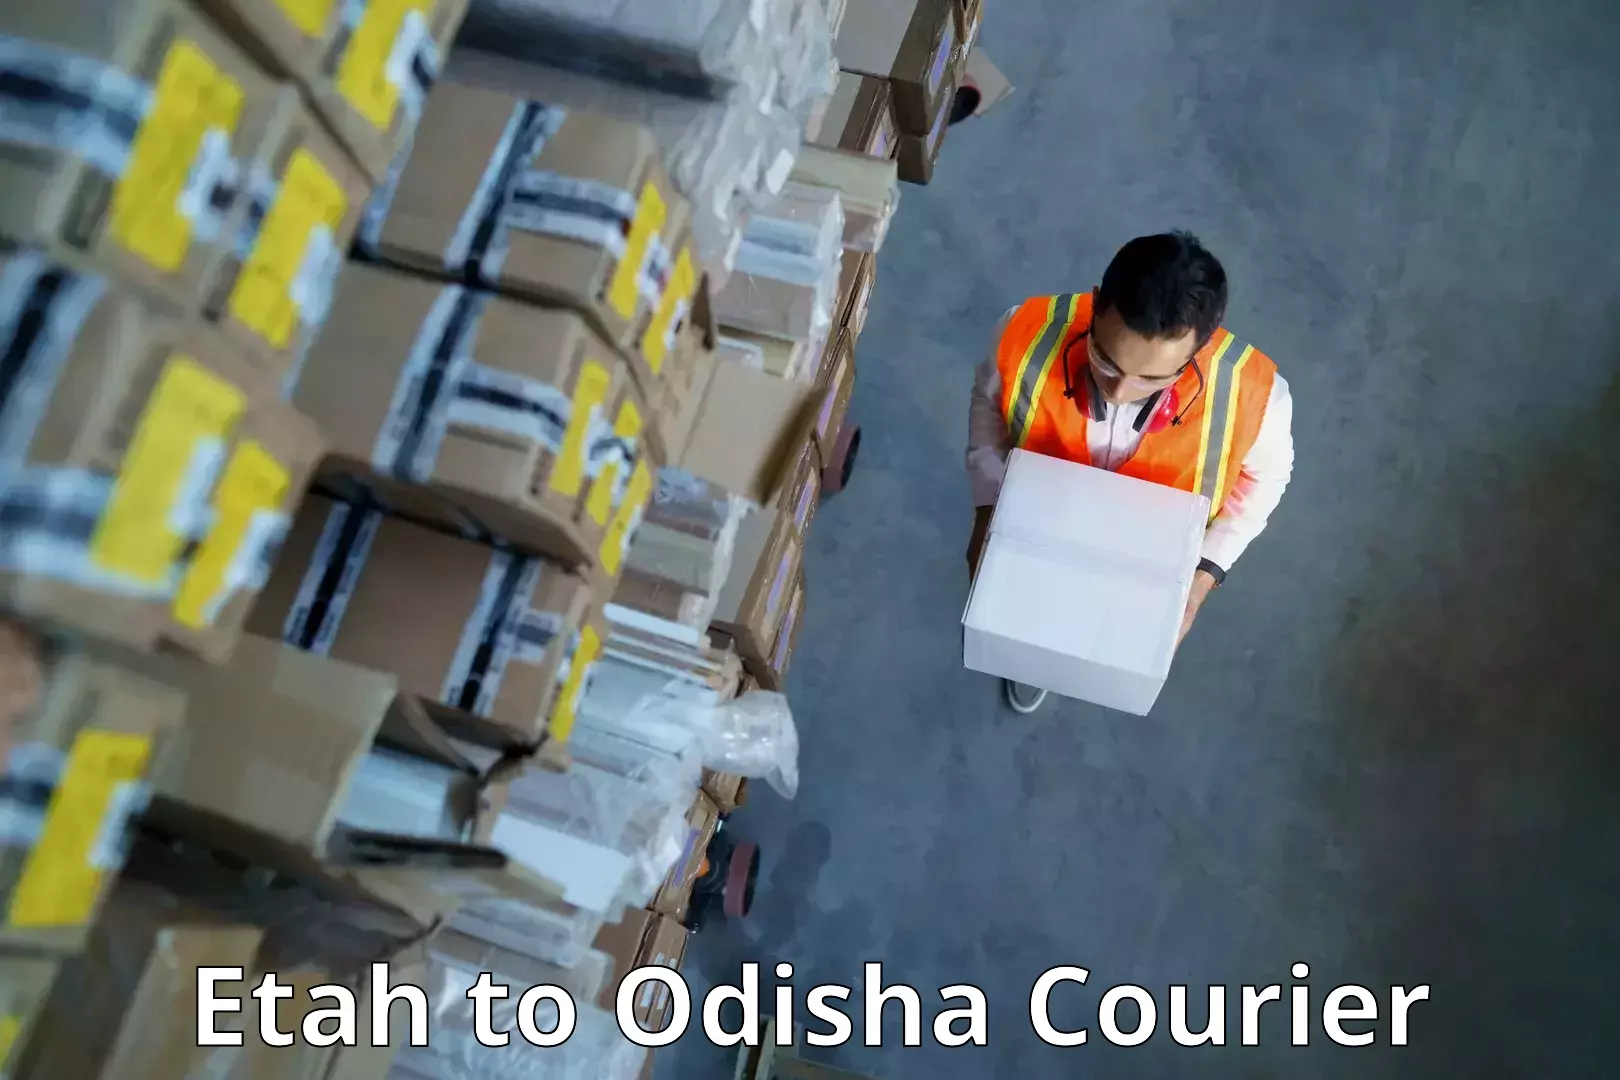 Scalable shipping solutions Etah to Bhadrak